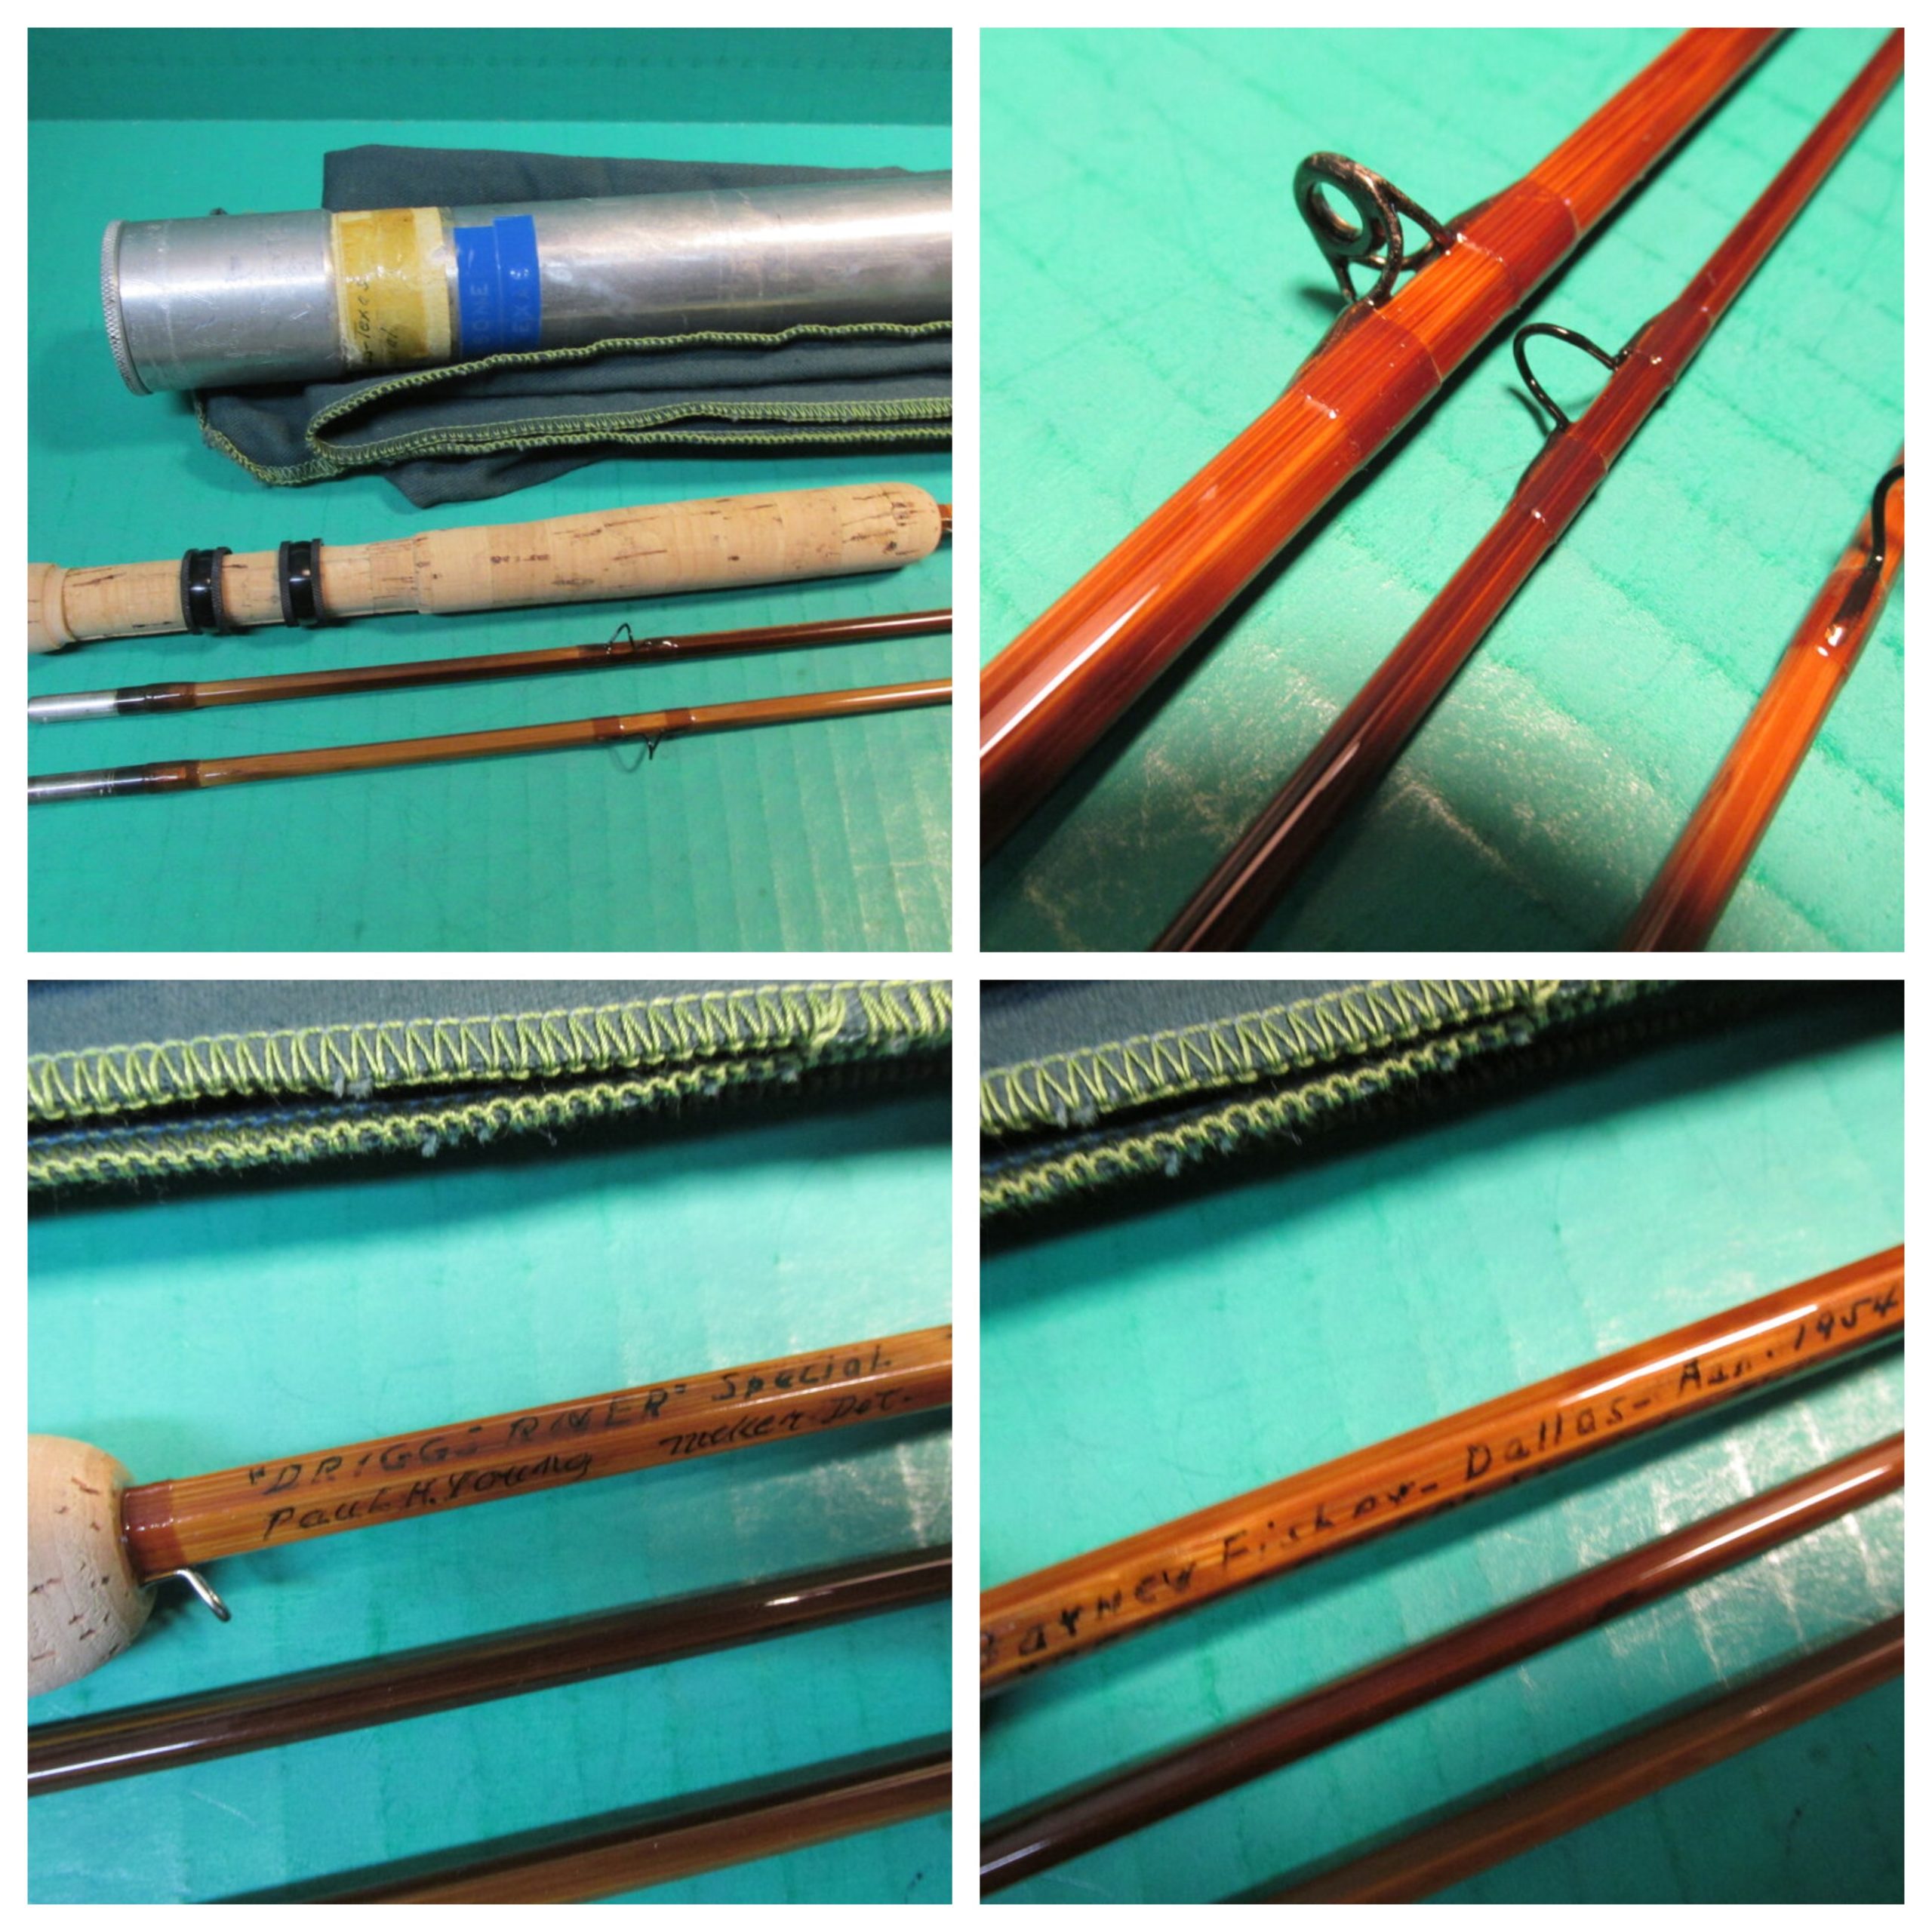 Heddon 9-foot split bamboo fly fishing rod No. 125 (with case), c.1940s